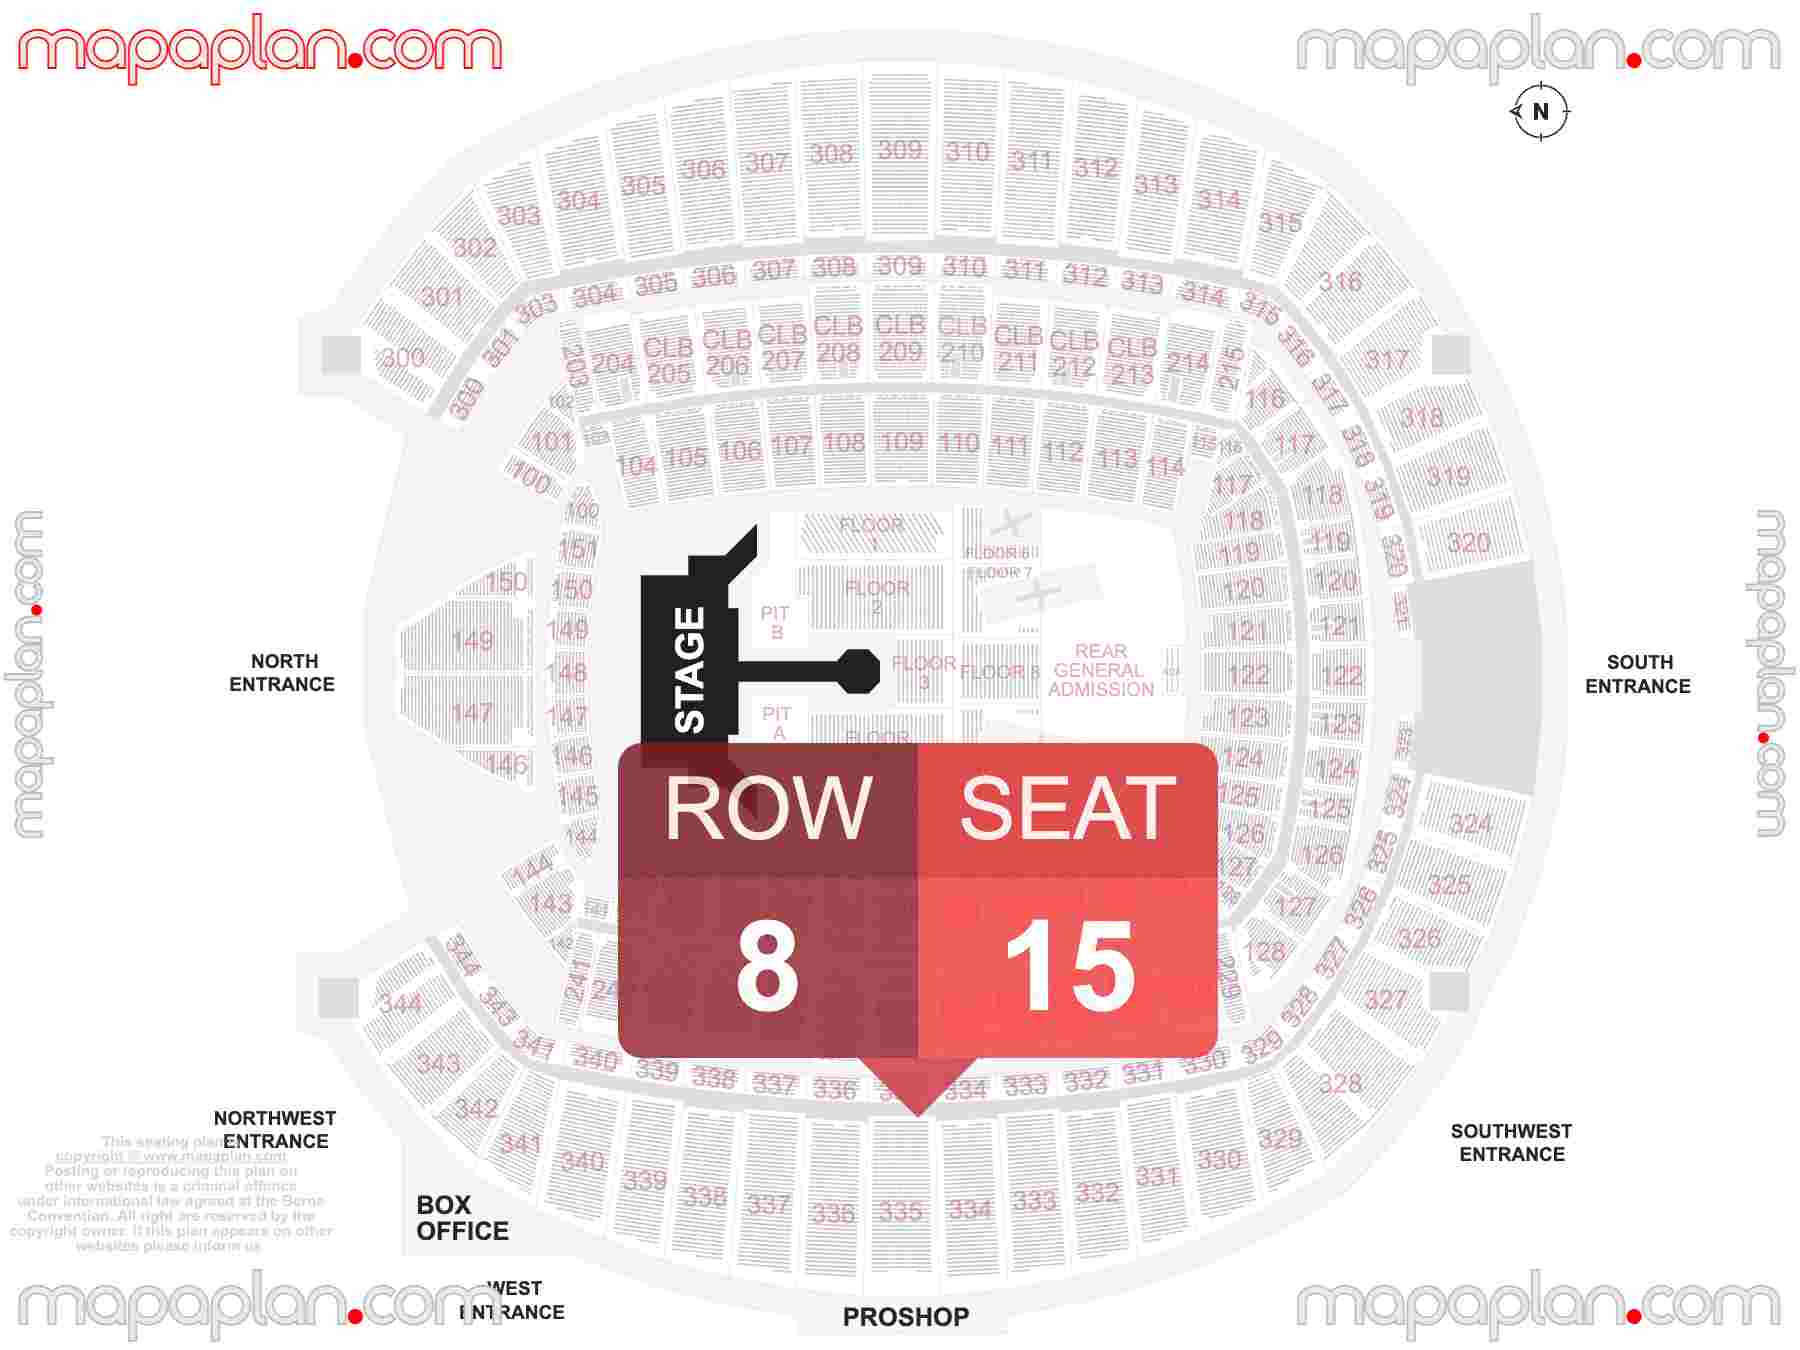 Seattle Lumen Field seating chart Concert detailed seat numbers and row numbering chart with interactive map plan layout